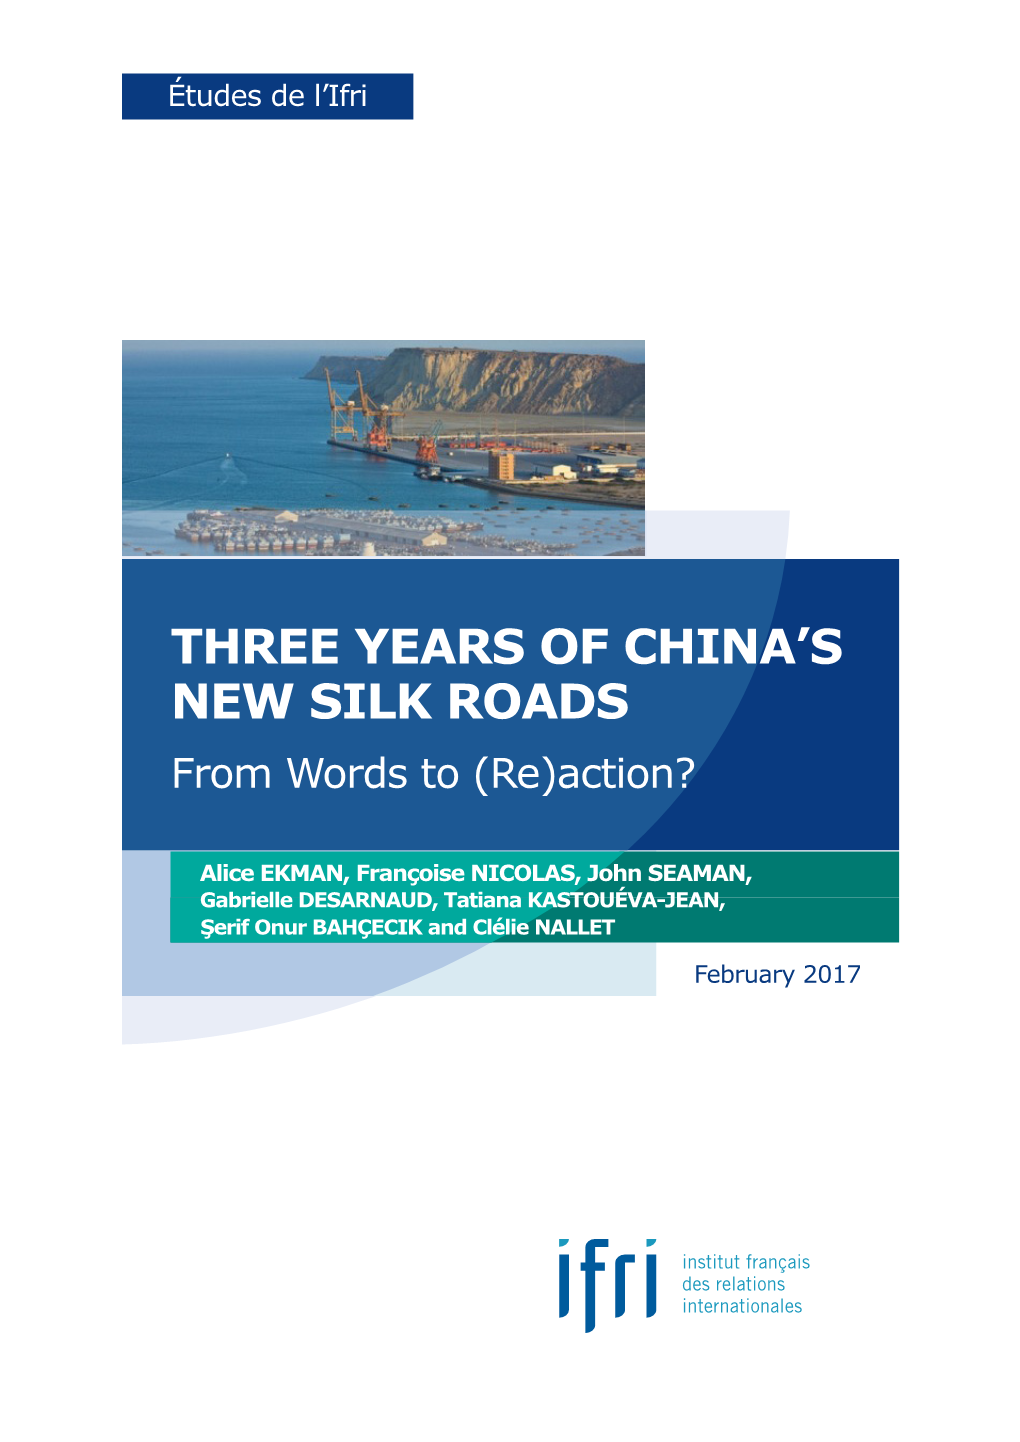 Three Years of China's New Silk Roads. from Words to (Re)Action